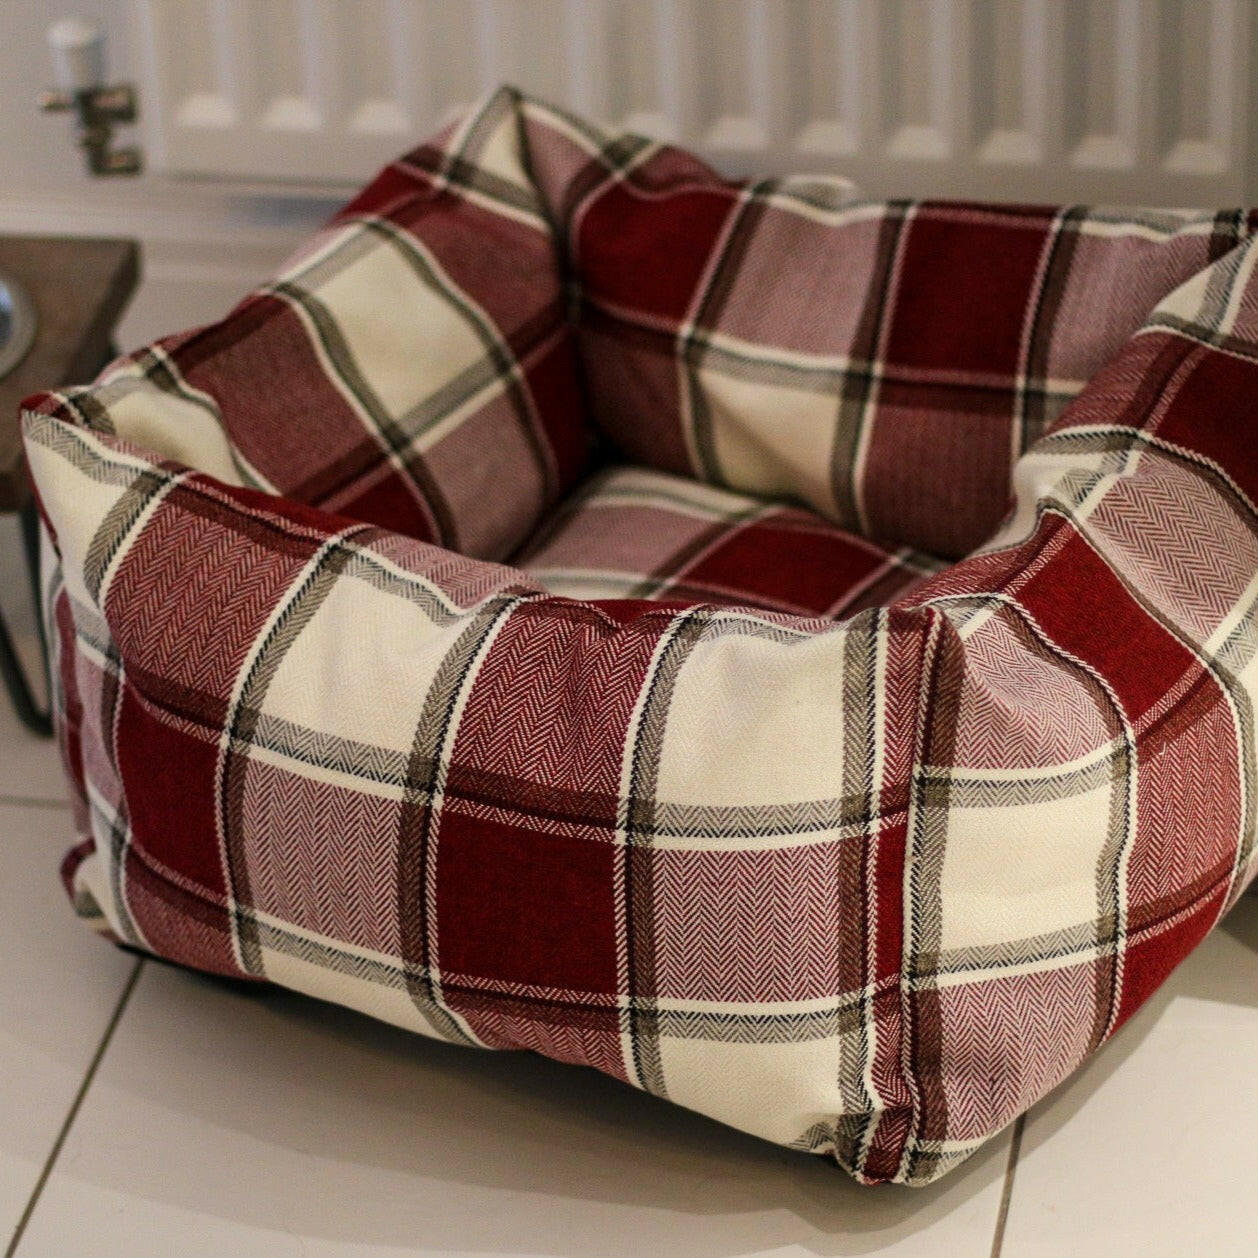 Heritage Collection Box Beds - Hugo and Ted